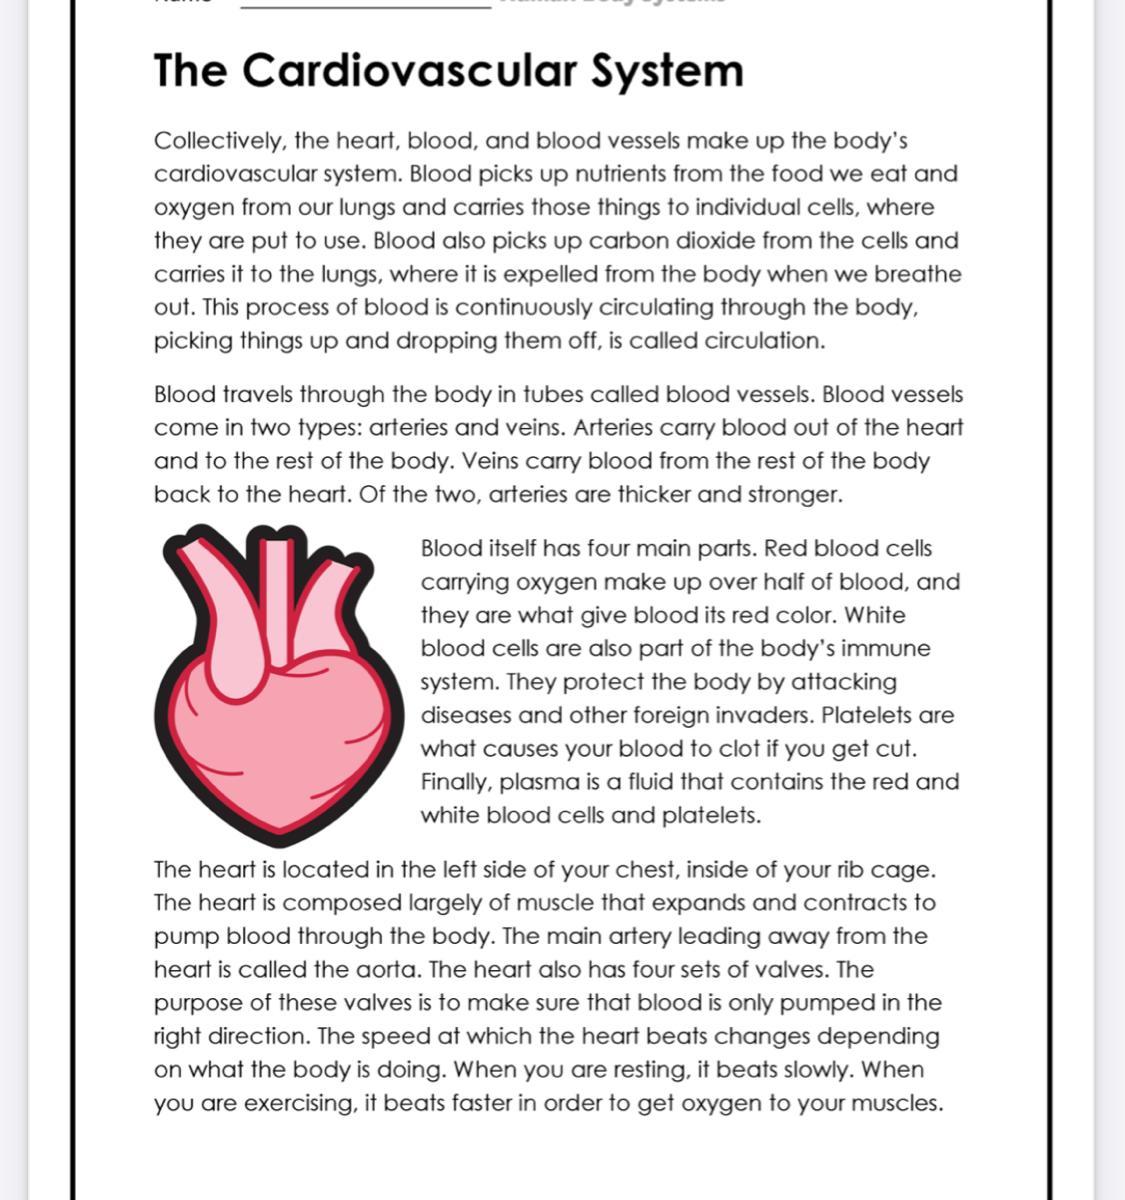 PLZ HELP ME ASAP Read The Article Above And Answer The Following Questions1. The Cardiovascular System